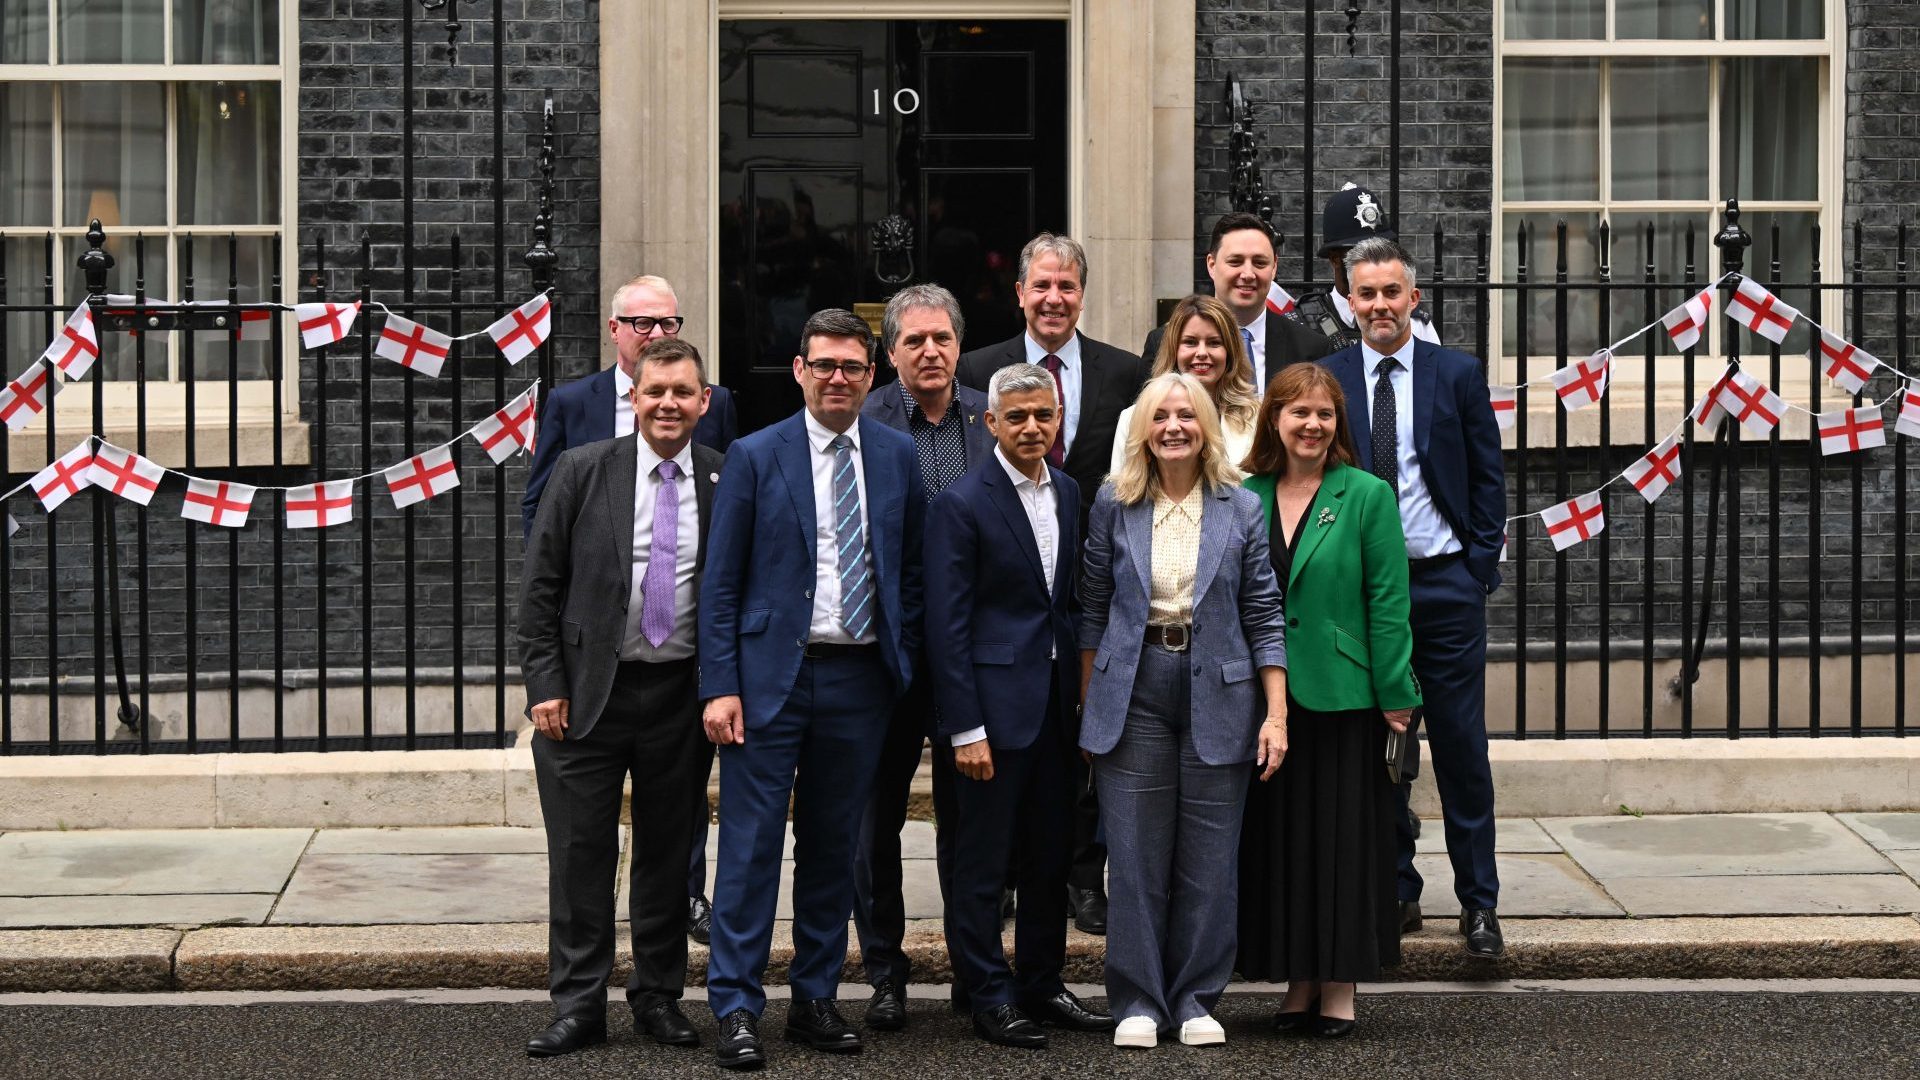 Eleven mayors pose for a photo in front of No 10 after attending Labour’s first weekly cabinet meeting. Photos: Rasid Necati  Aslim/Anadolu/Getty